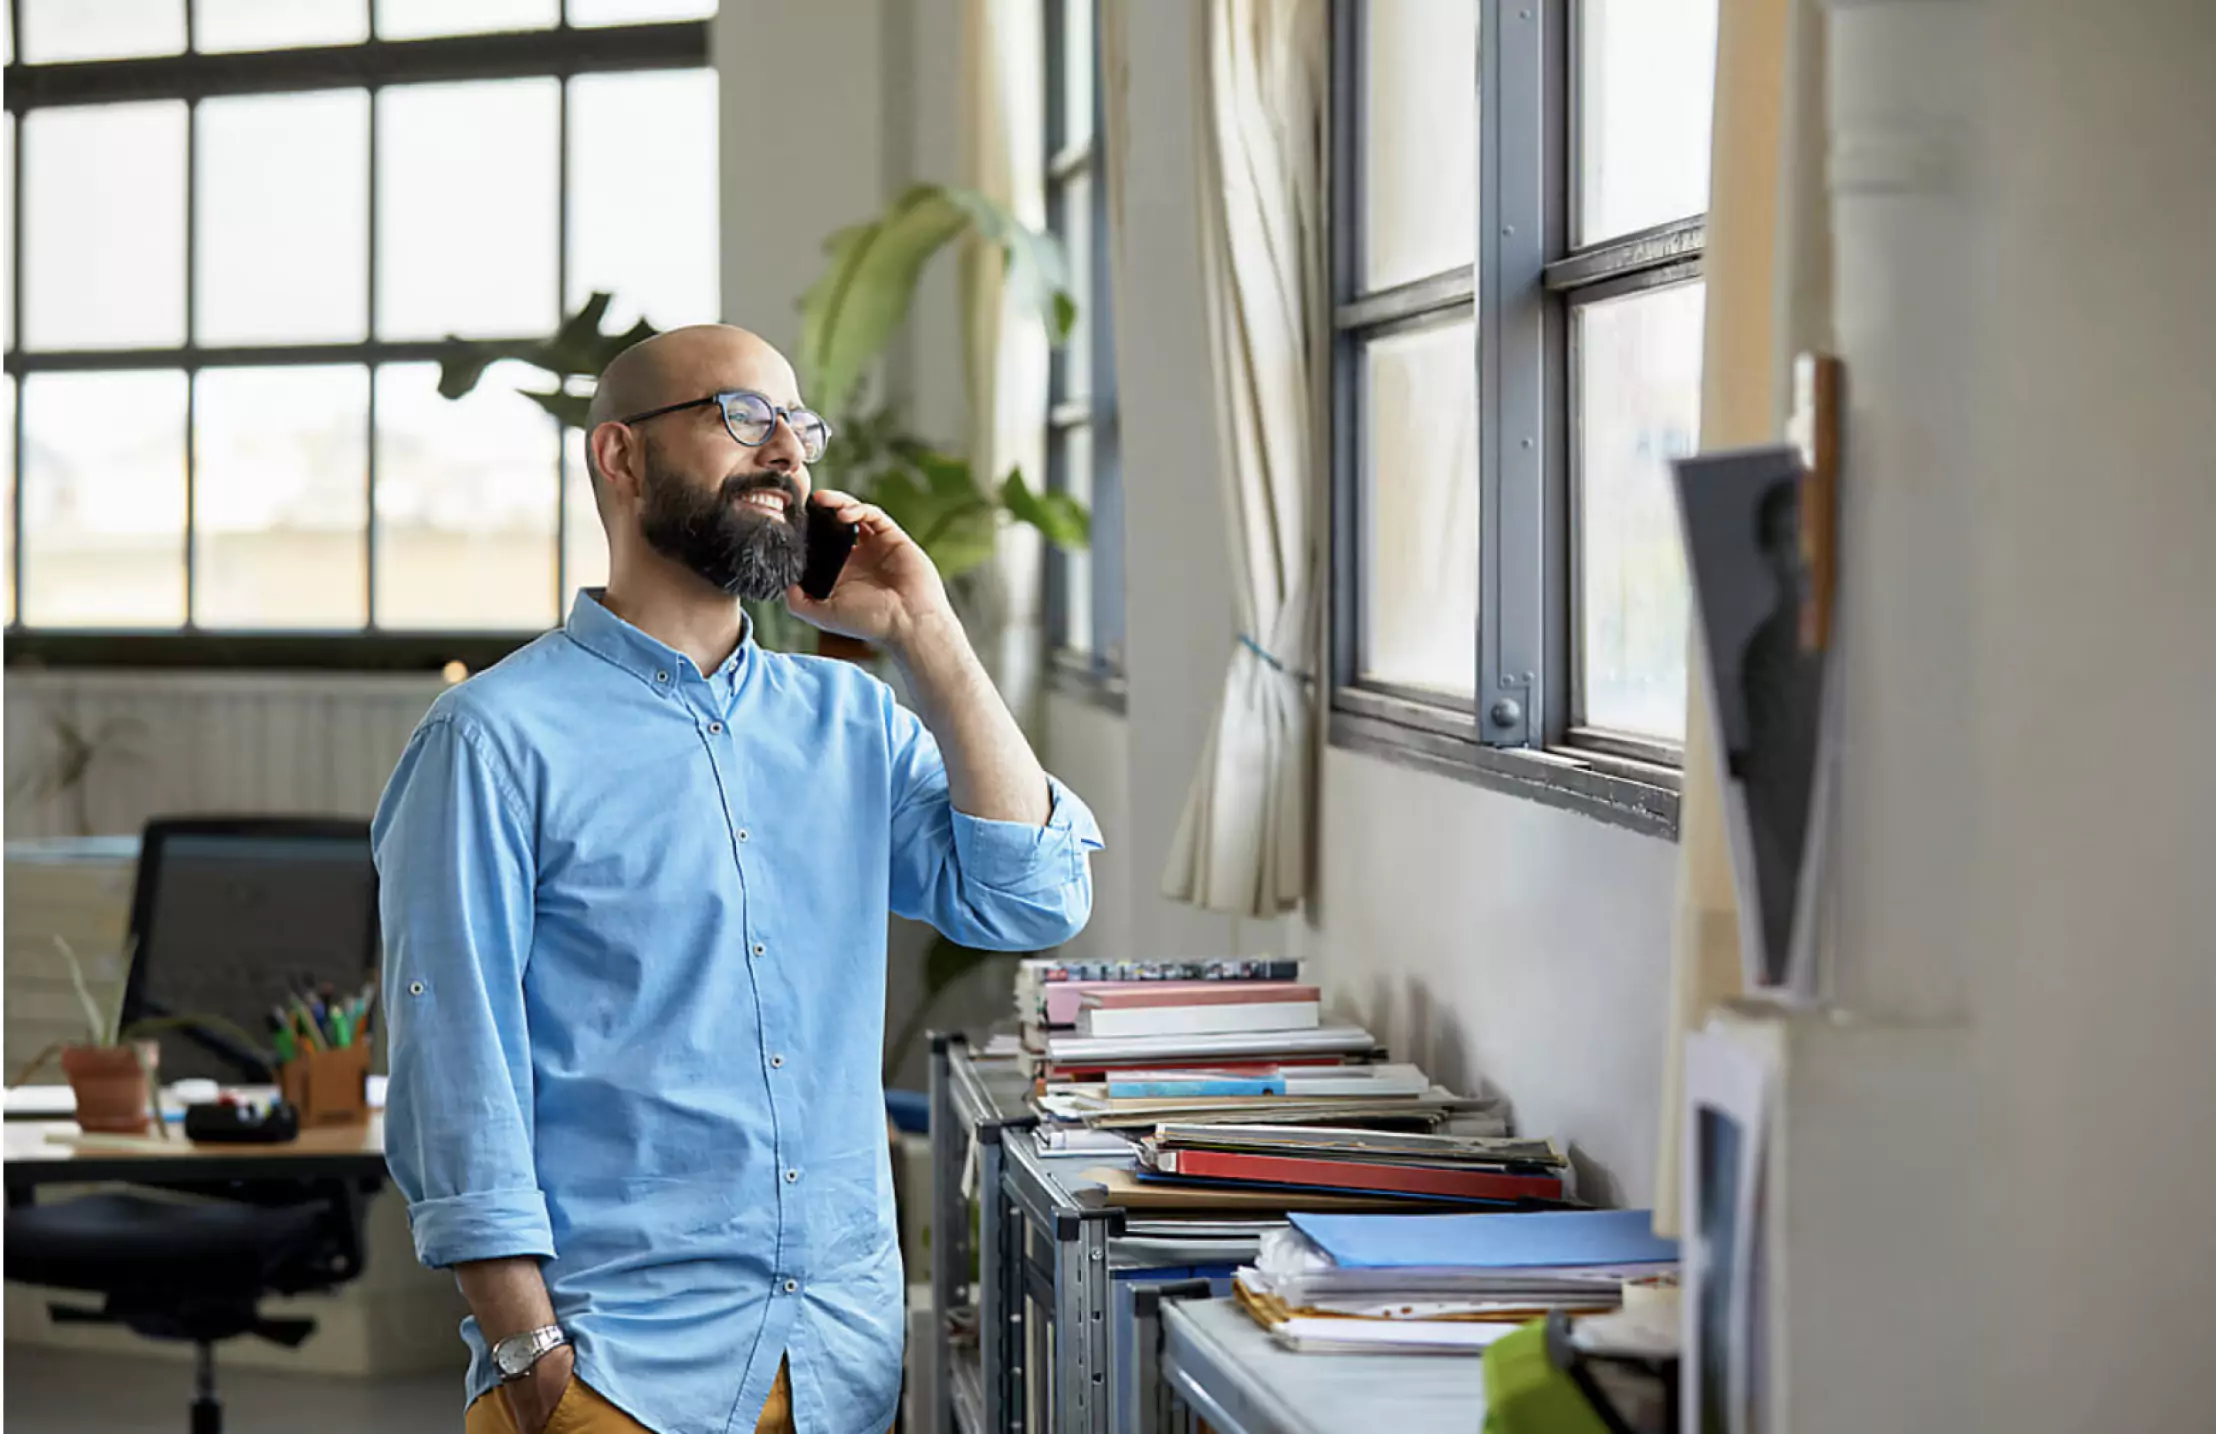 Man with glasses speaking on the phone while looking out an office window